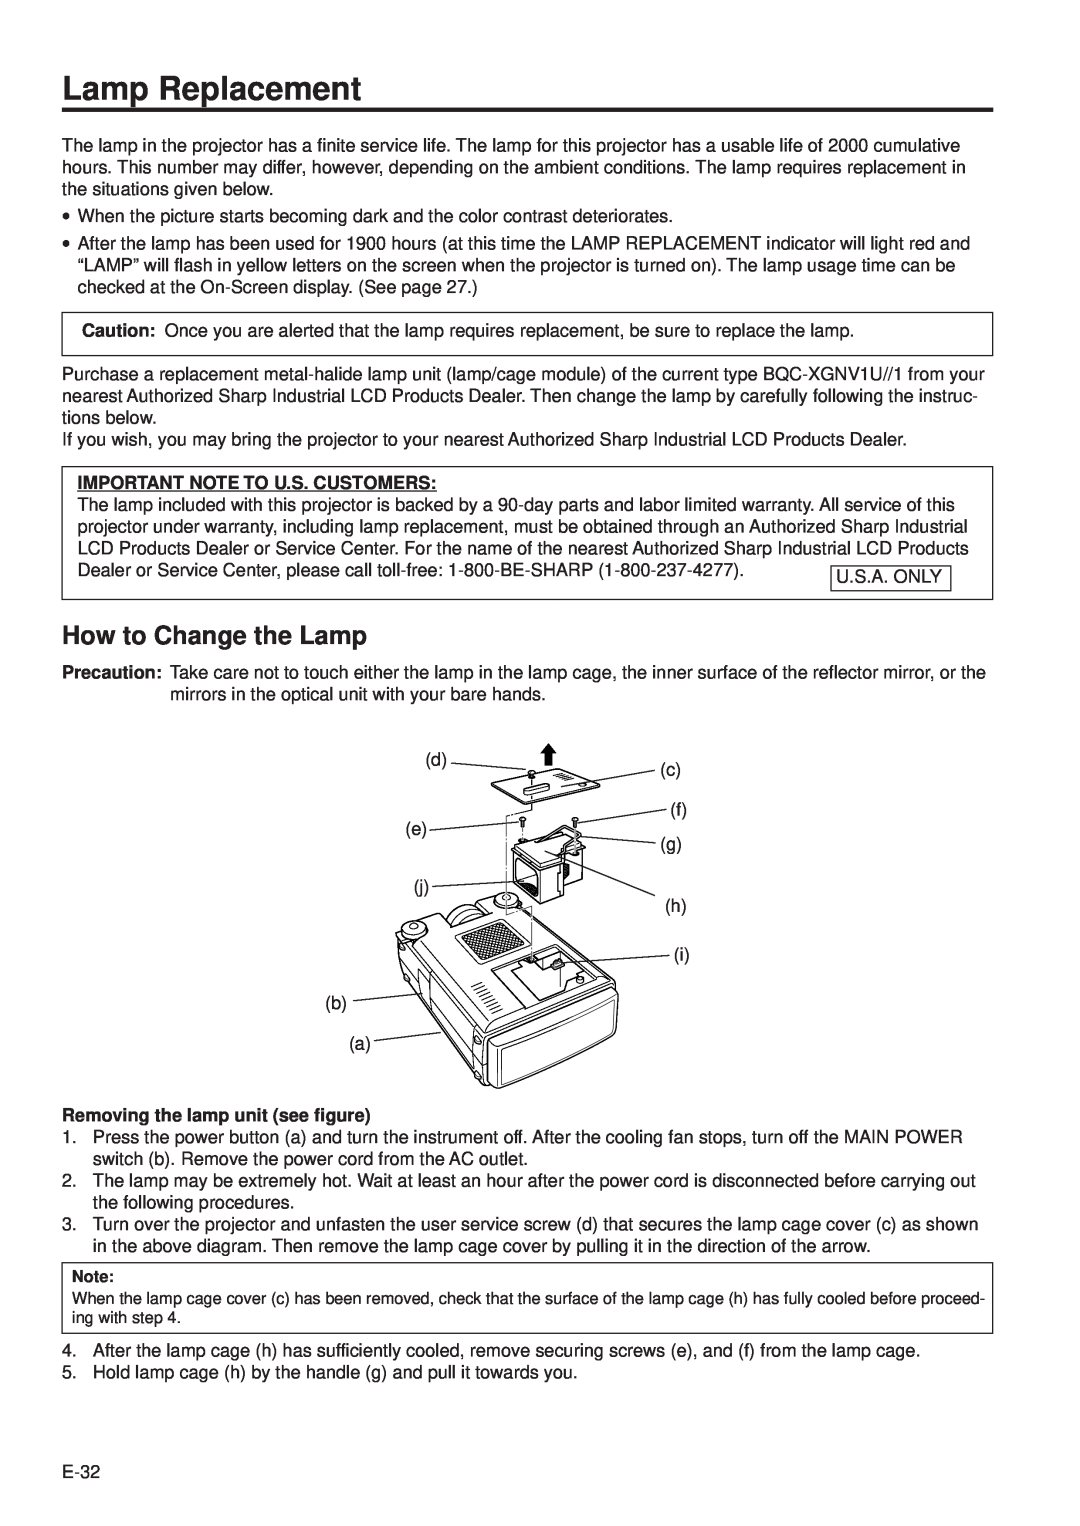 Sharp PG-D100U operation manual Lamp Replacement, How to Change the Lamp, Important Note To U.S. Customers 